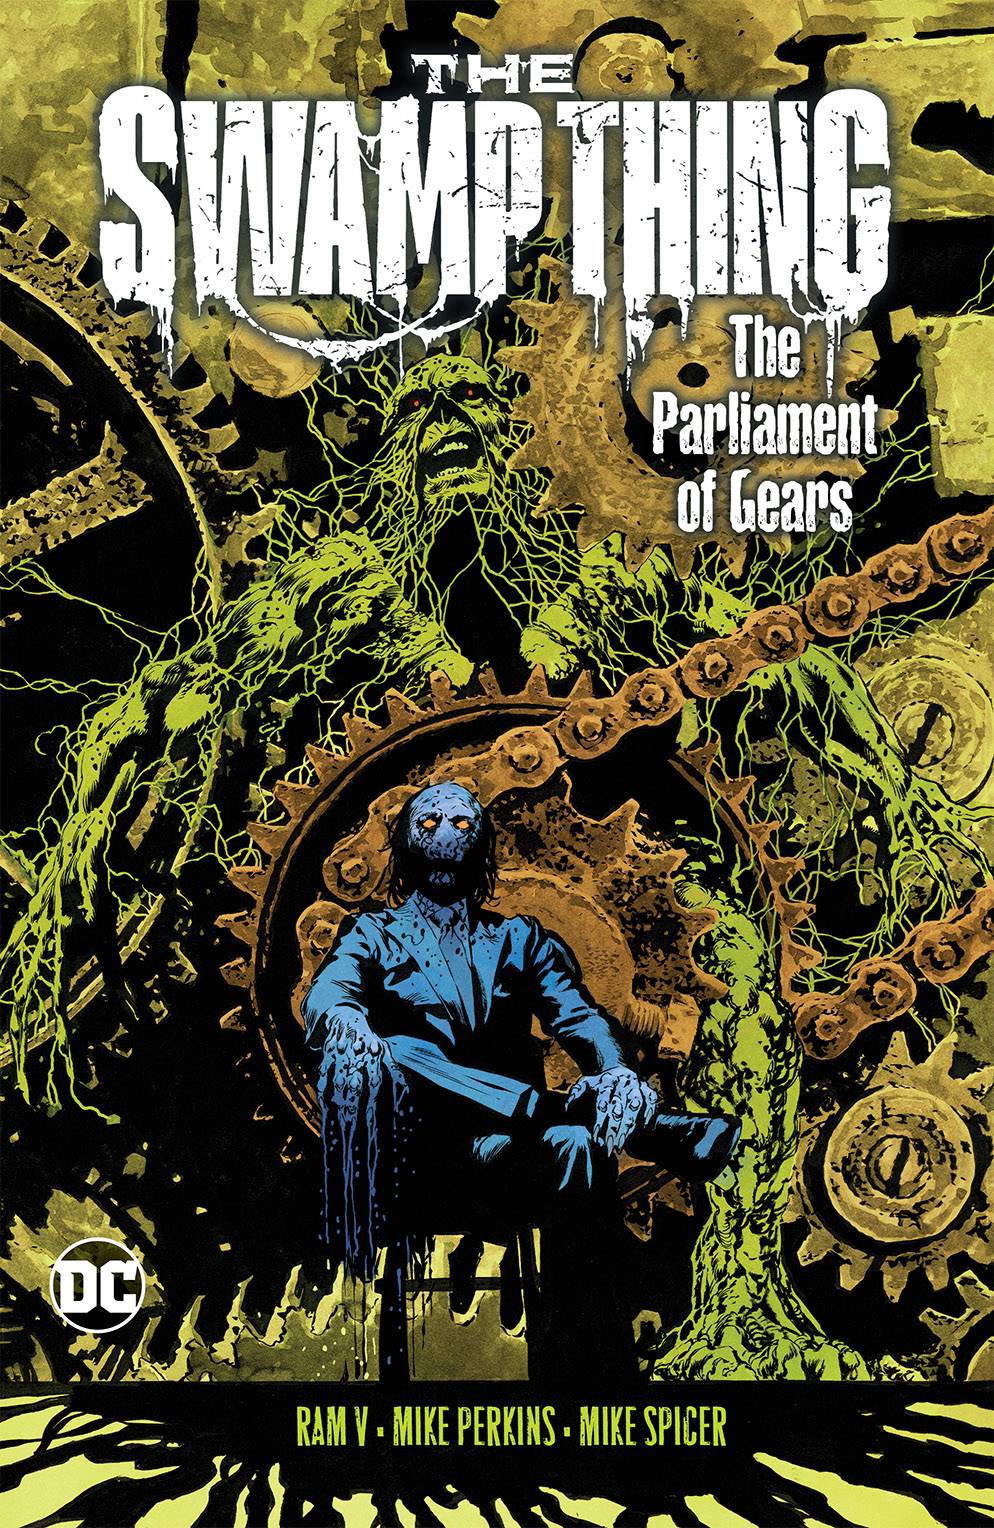 The Swamp Thing vol 3: The Parliament Of Gears s/c